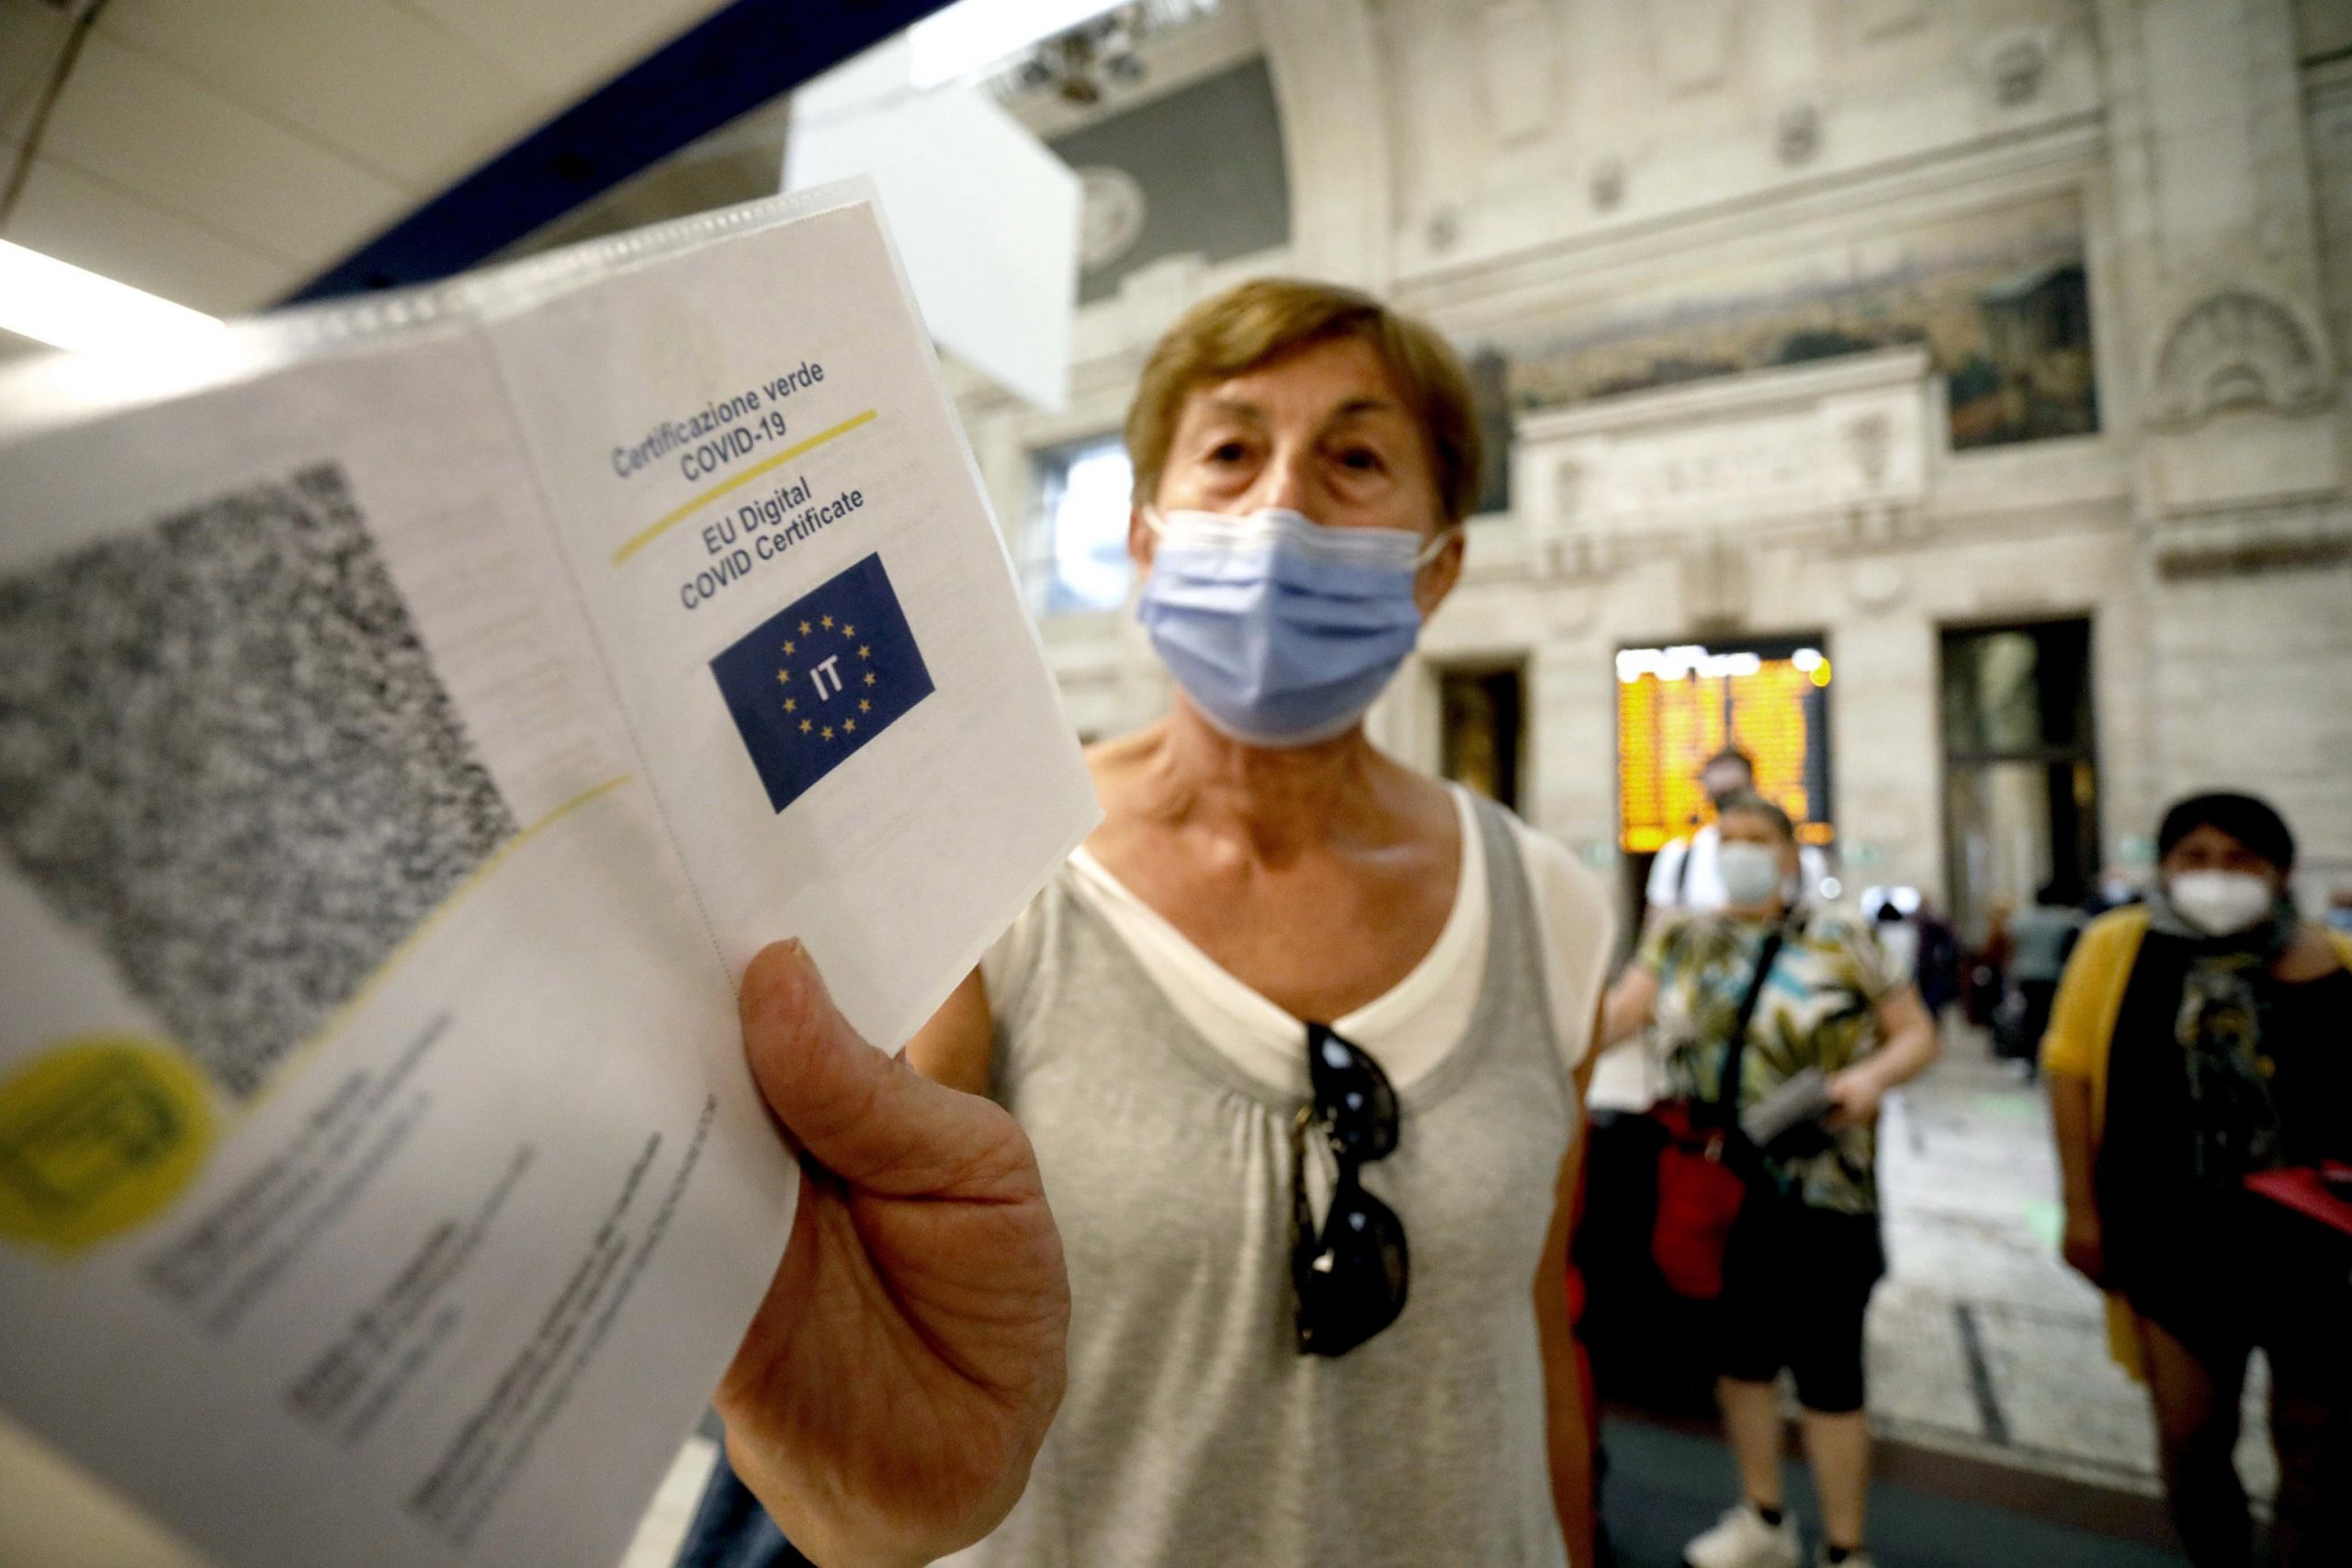 epa09440080 Green Pass vaccine passports of passengers departing from the Central Station are checked, in Milan, Italy, 01 September 2021. Starting from today Italy's Green Pass vaccine passport is obligatory for long-distance trains, domestic air flights and schools amid widespread misgivings.  EPA/Mourad Balti Touati